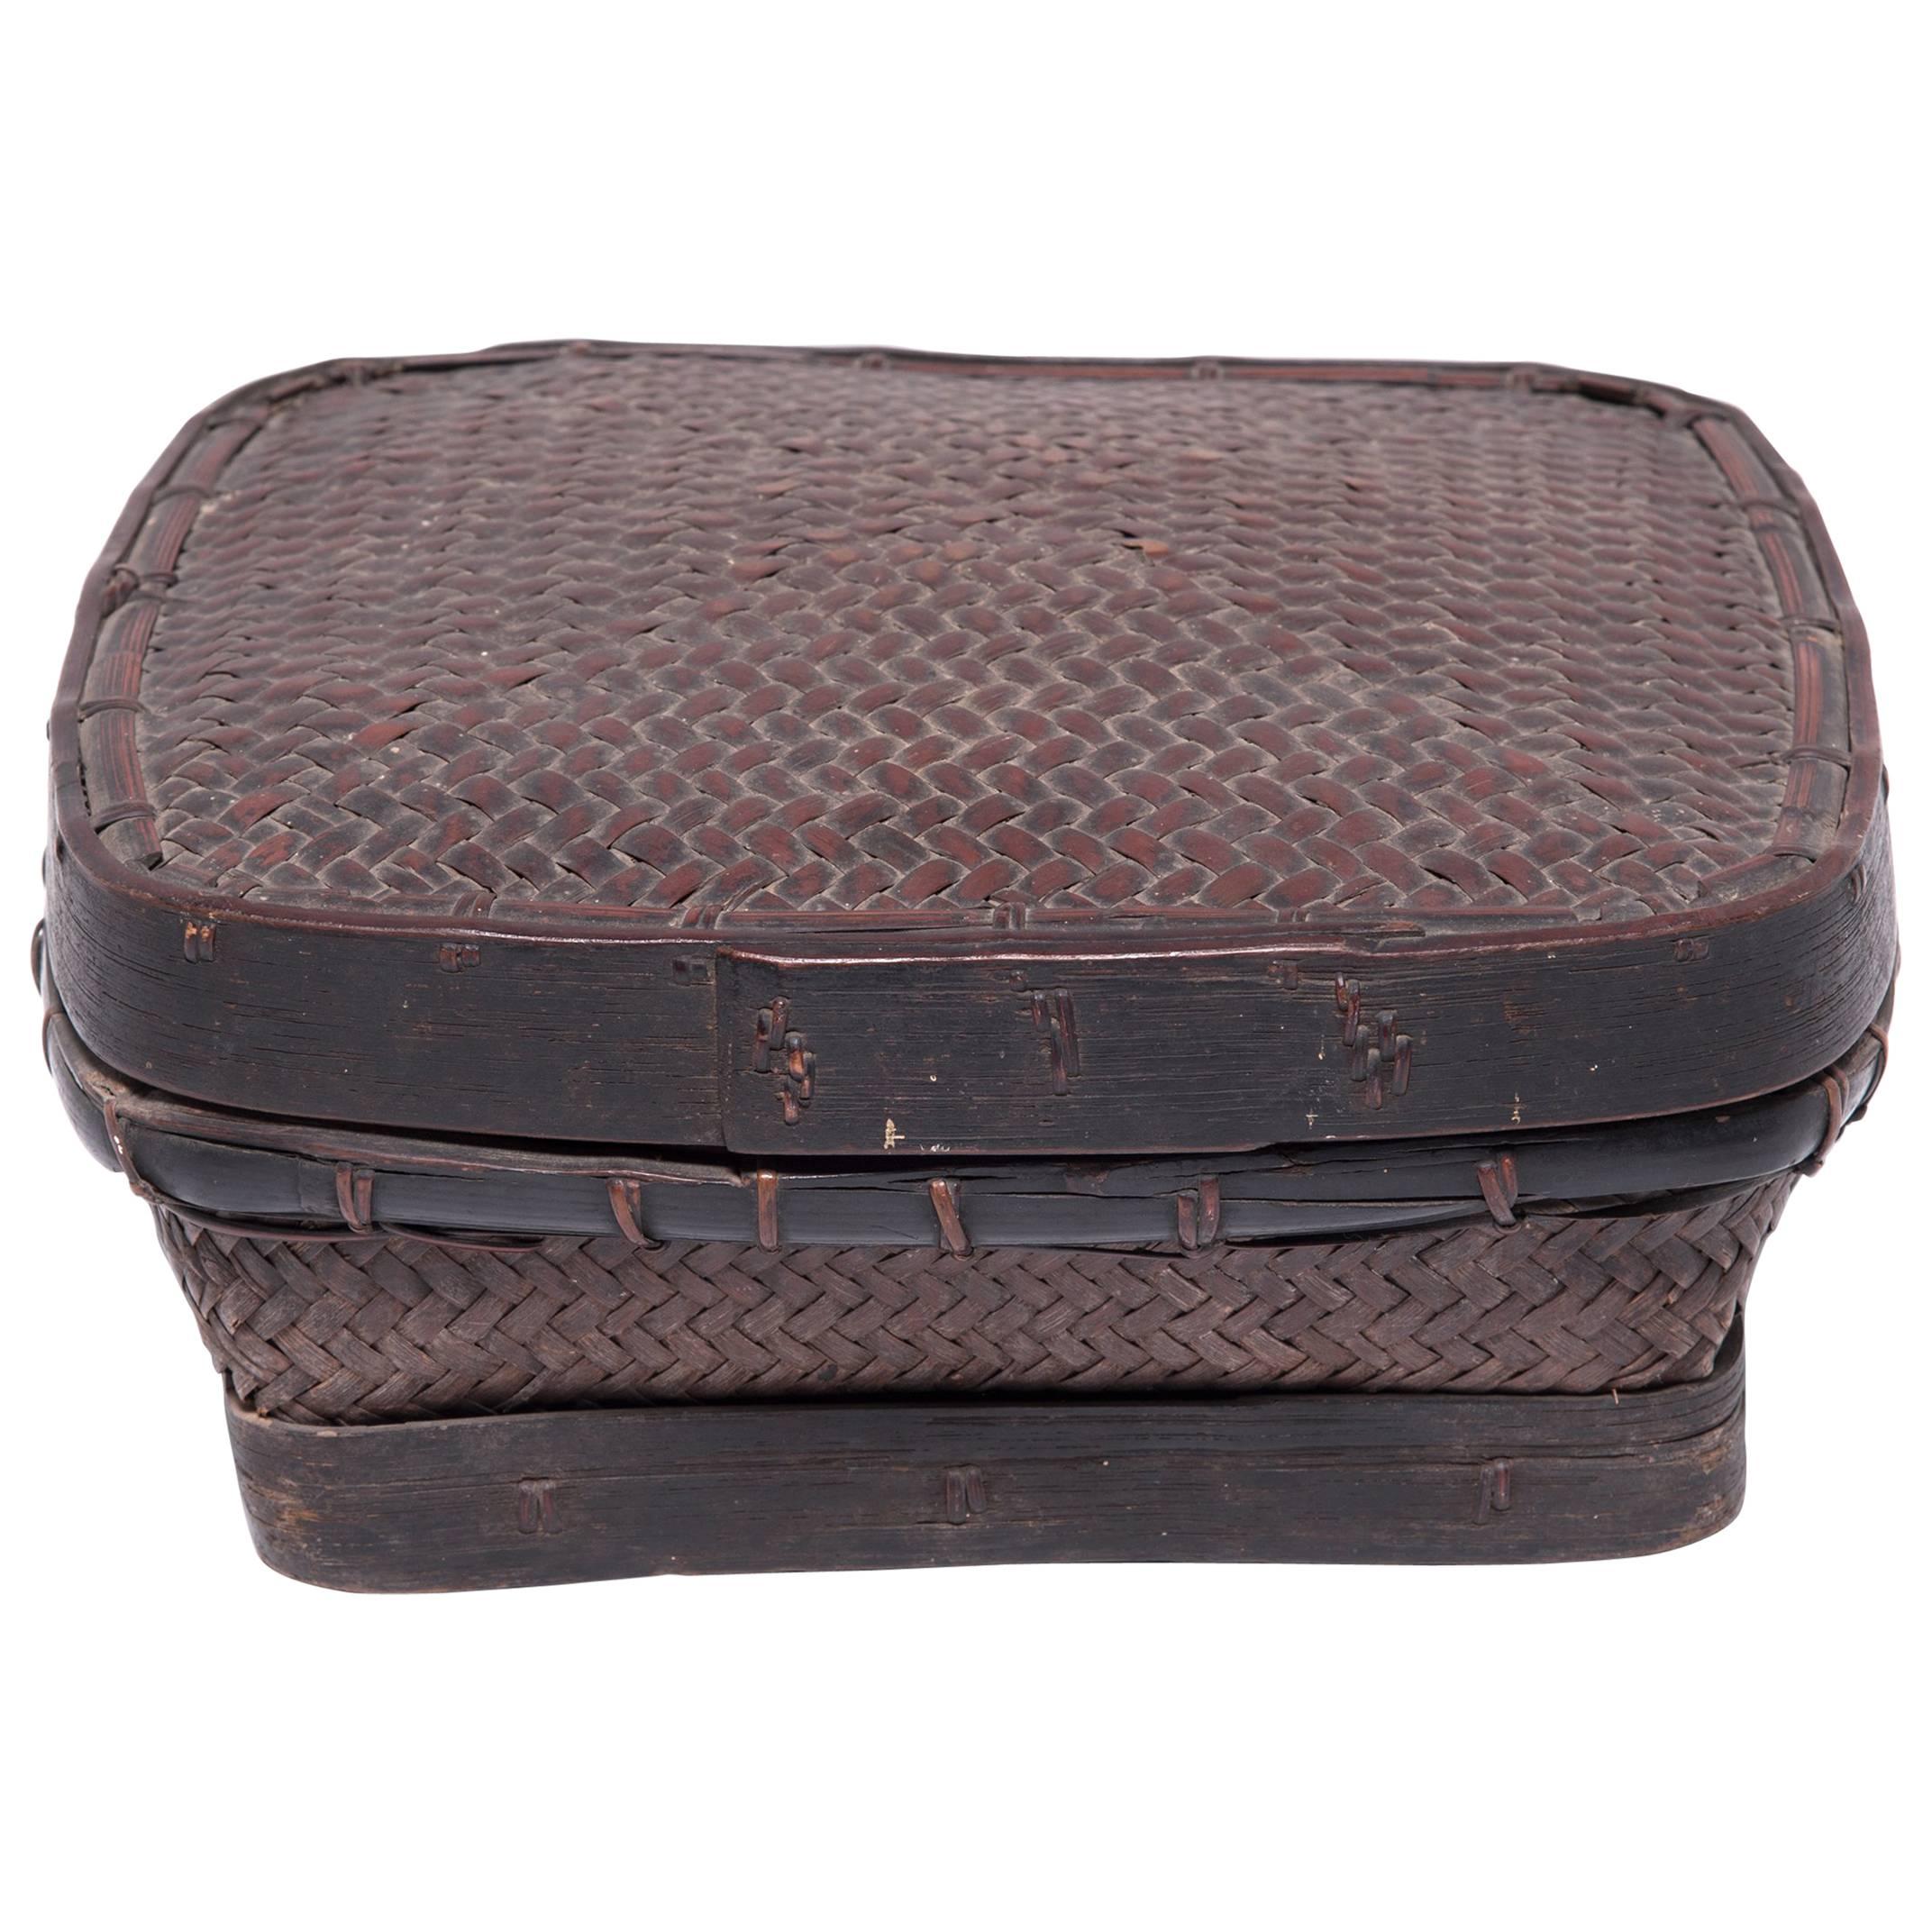 Early 20th Century Filipino Lidded Square Basket